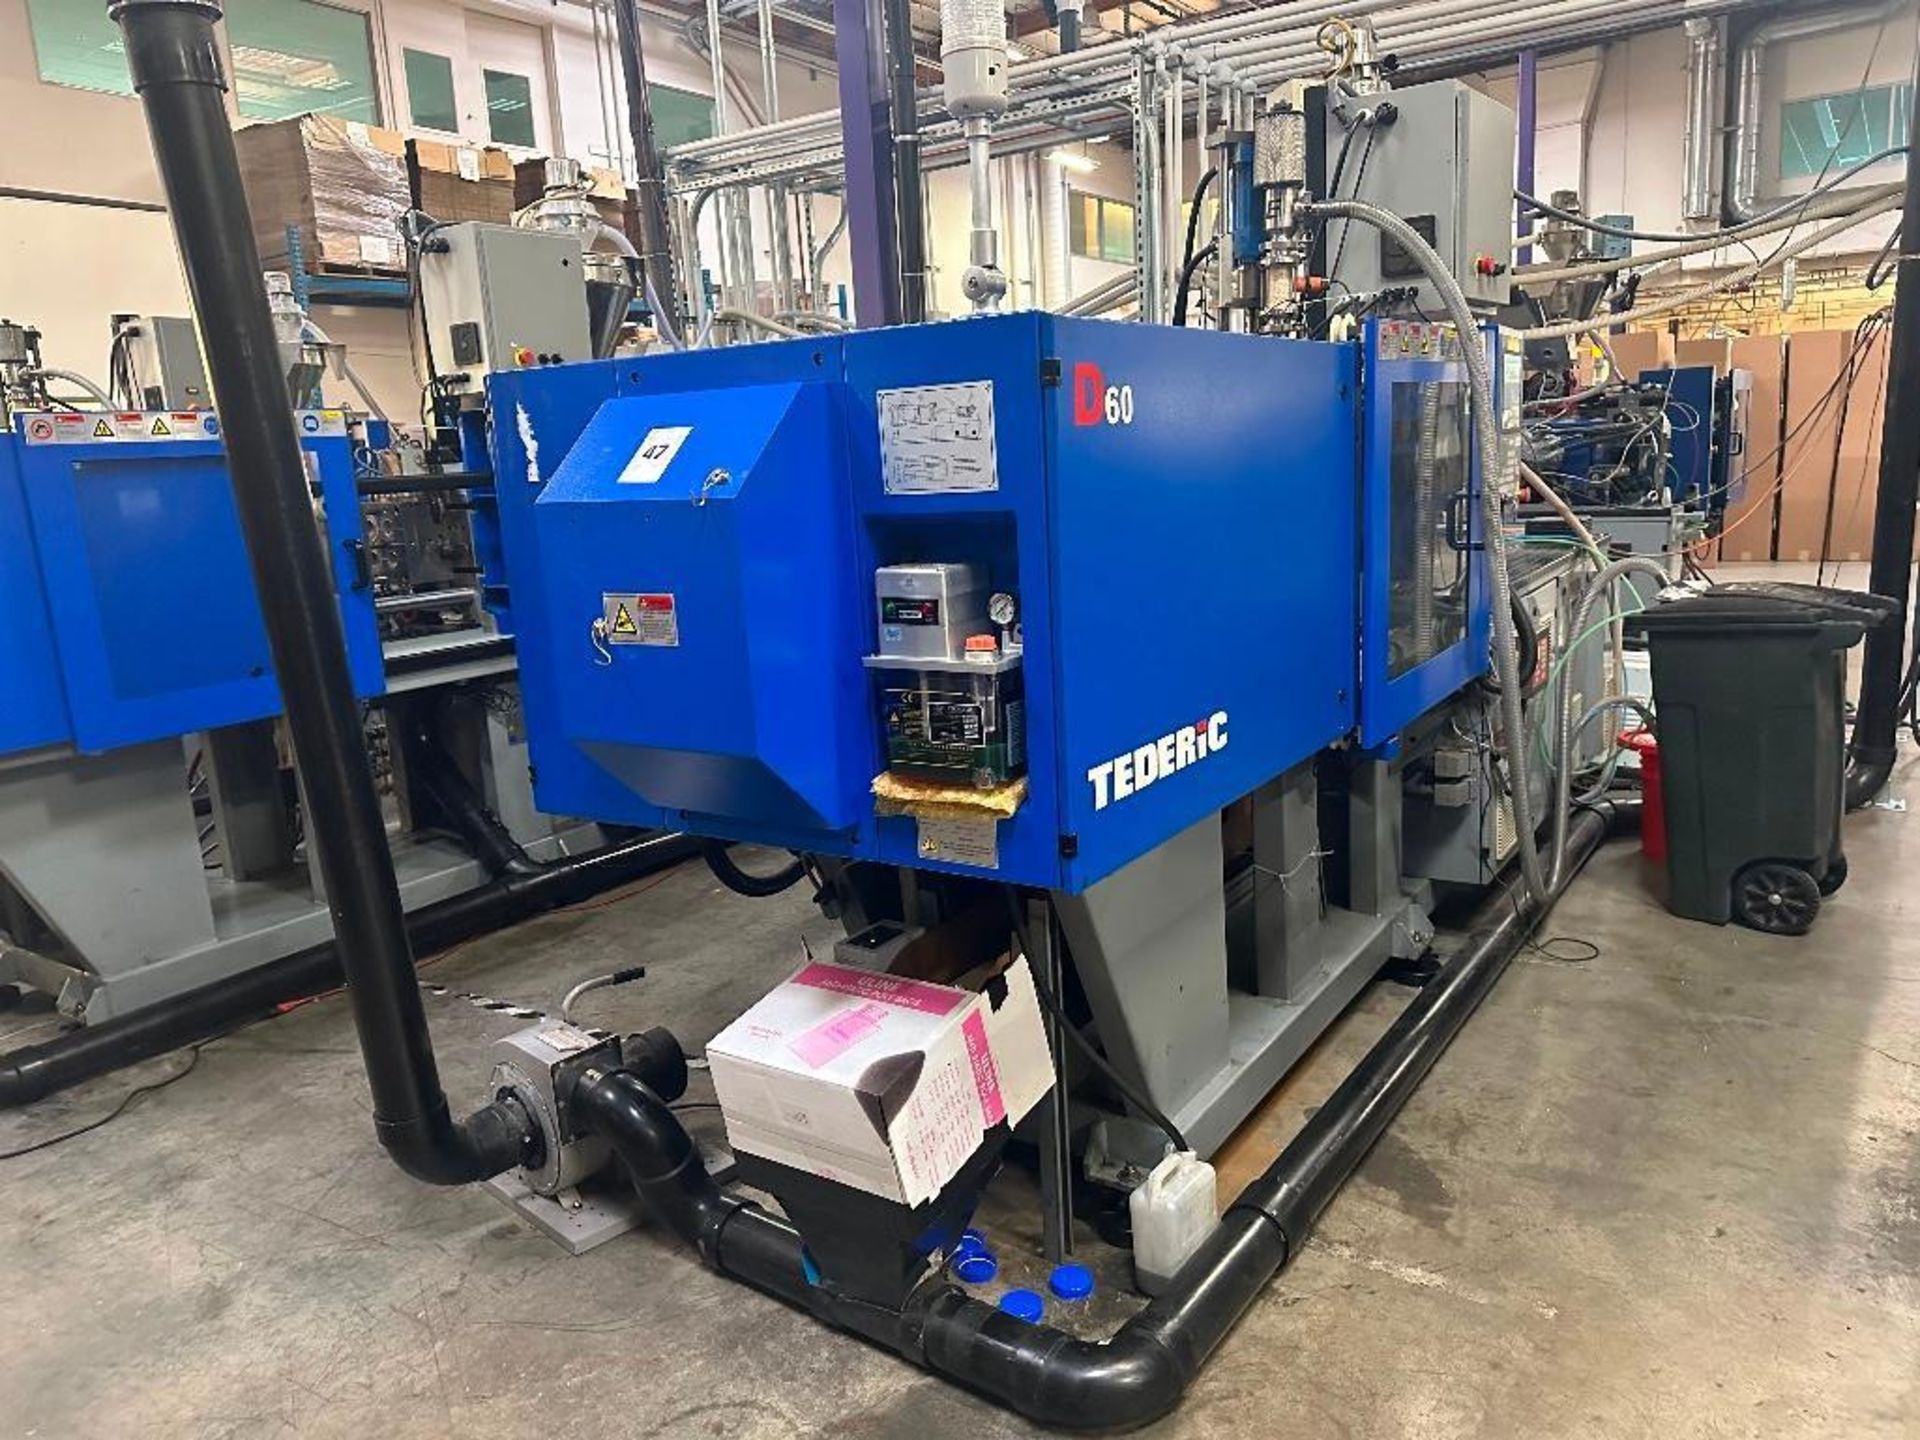 66 Ton Tederic D60 Plastic Injection Molder, Keba 12000 Control, s/n T3008-0200, New 2018 - Image 2 of 17